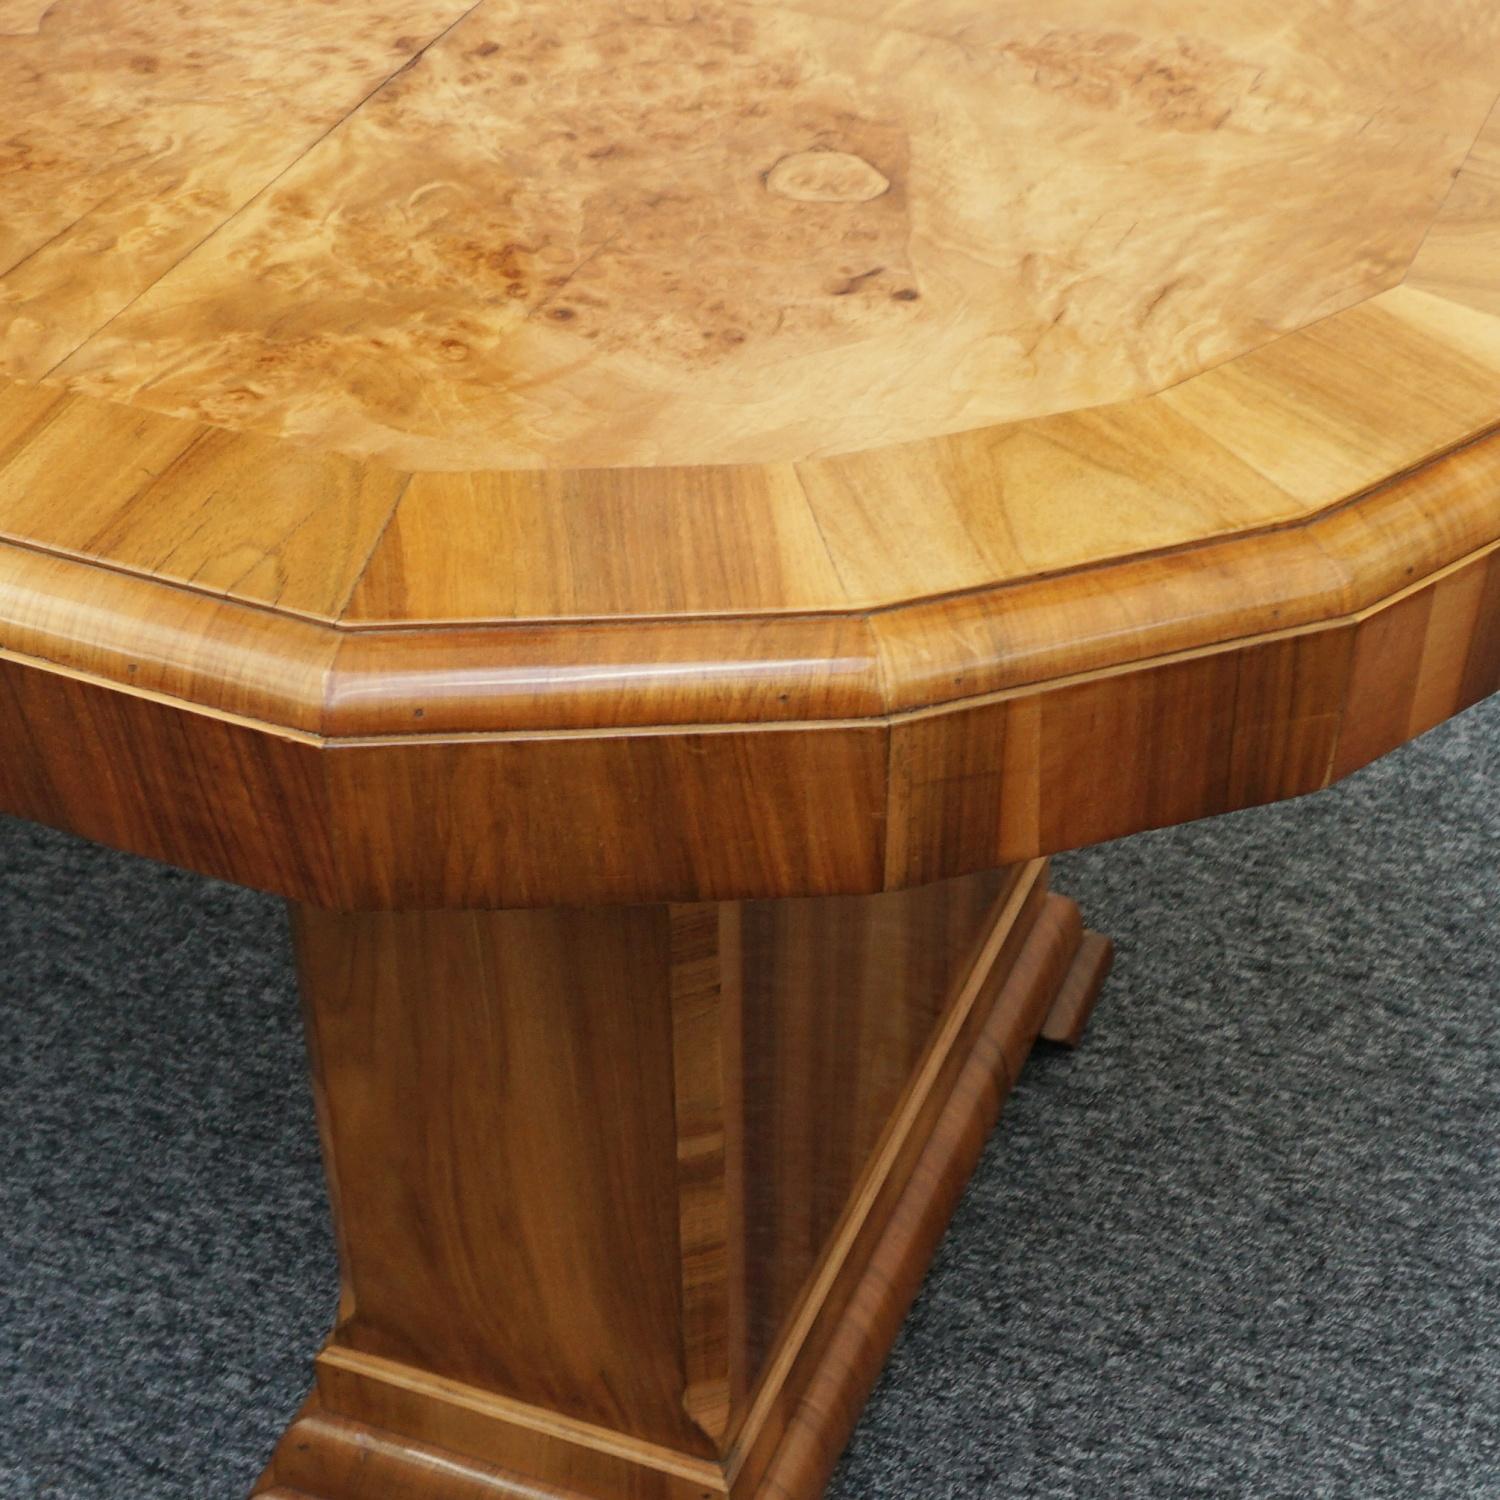 An Art Deco dining table. Burr walnut veneered table top with figured walnut banding over stepped burr walnut veneered pedestals. 

Dimensions: H 76cm W 97cm L 190cm 

Origin: English

Date: Circa 1930

Item Number: 1110222

All of our